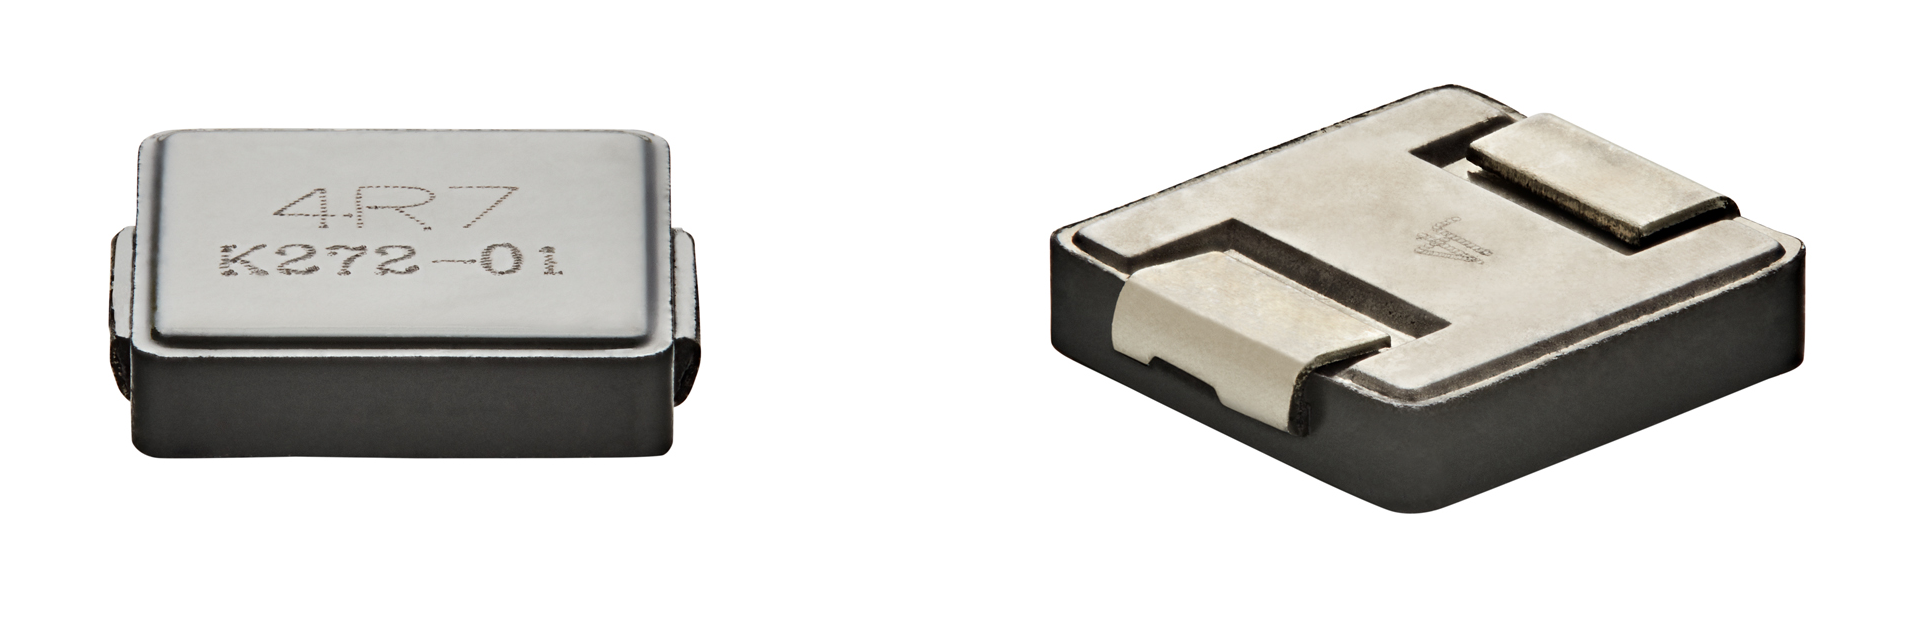 Surface Mount Inductors for Multi-Purpose Applications